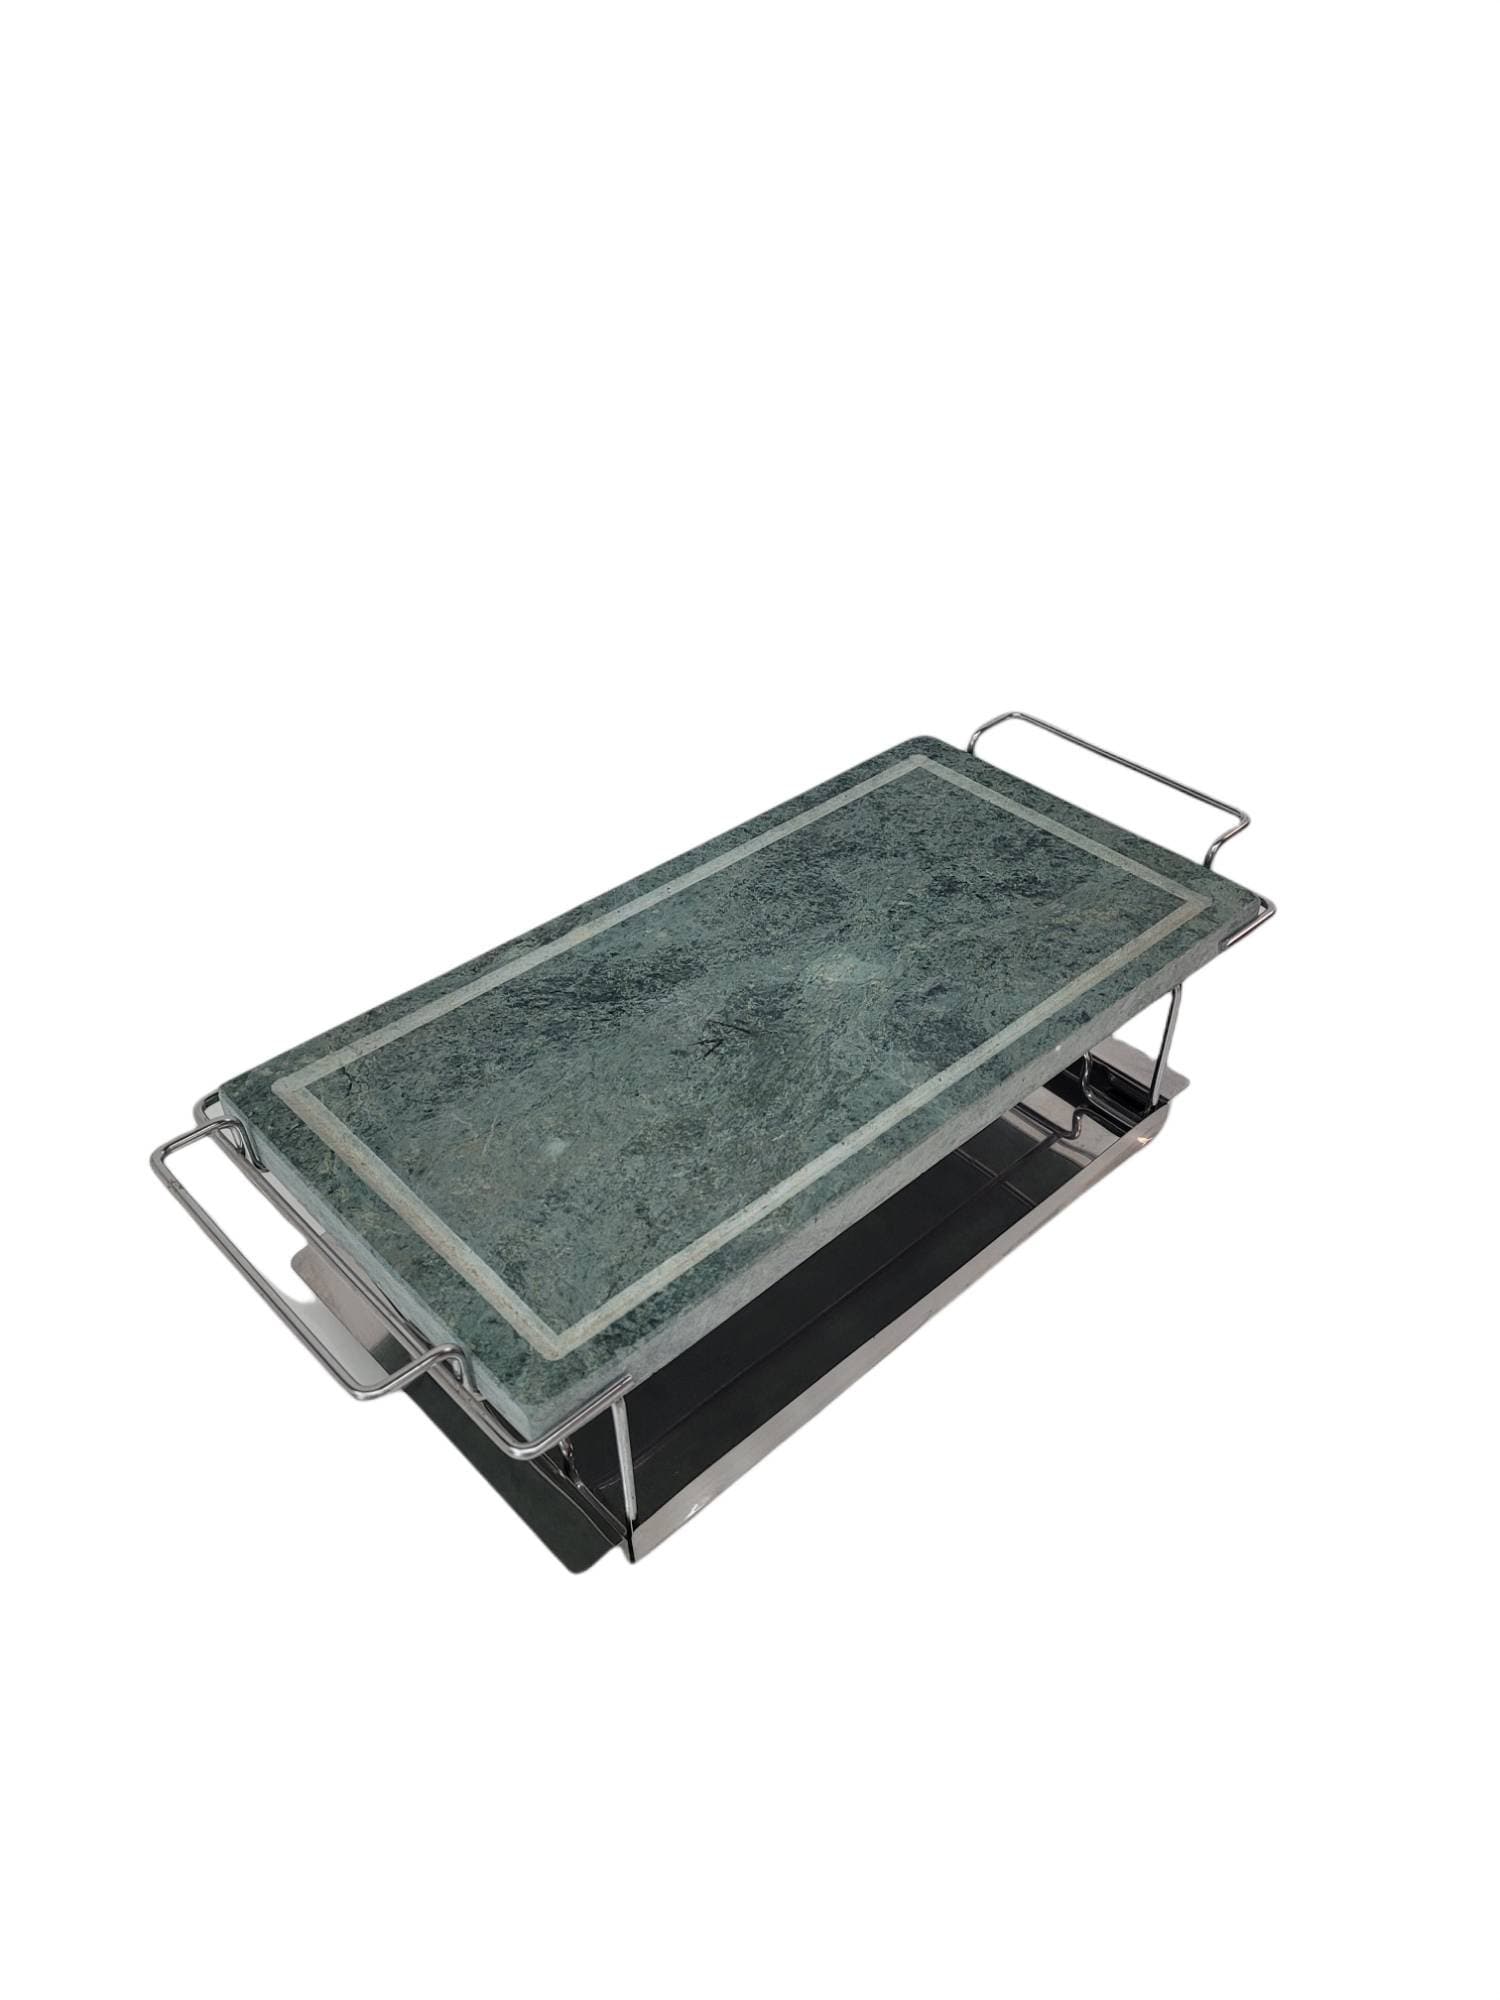 marble serving tray cheese board fondue